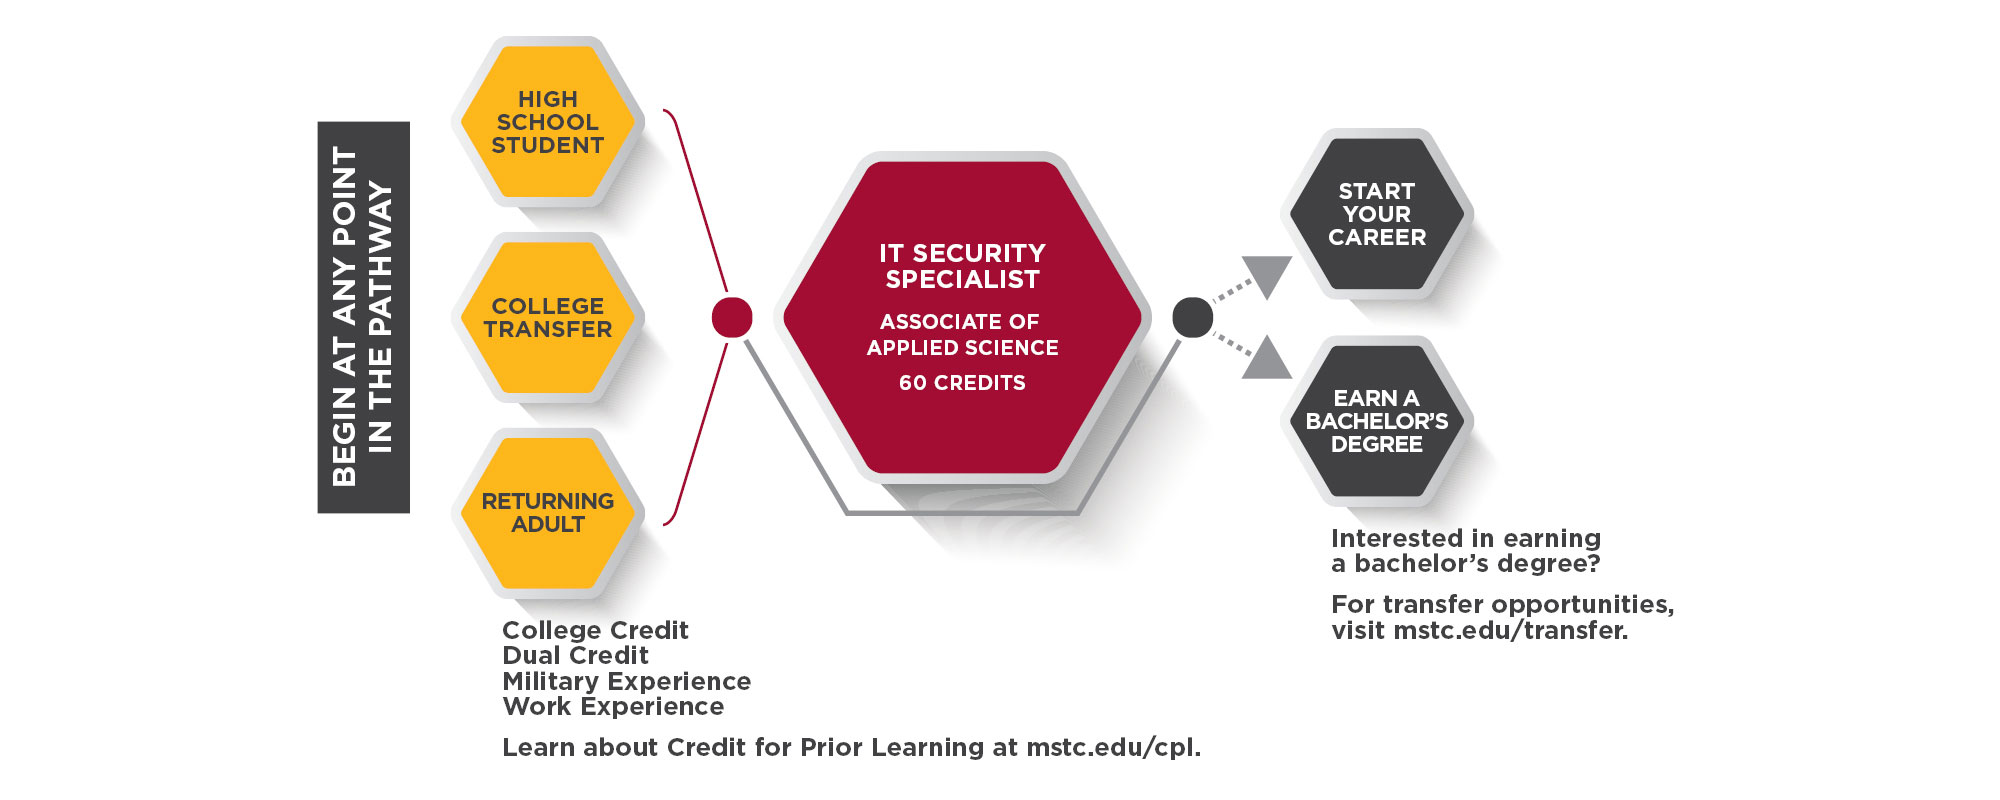 IT Security Specialist Pathway